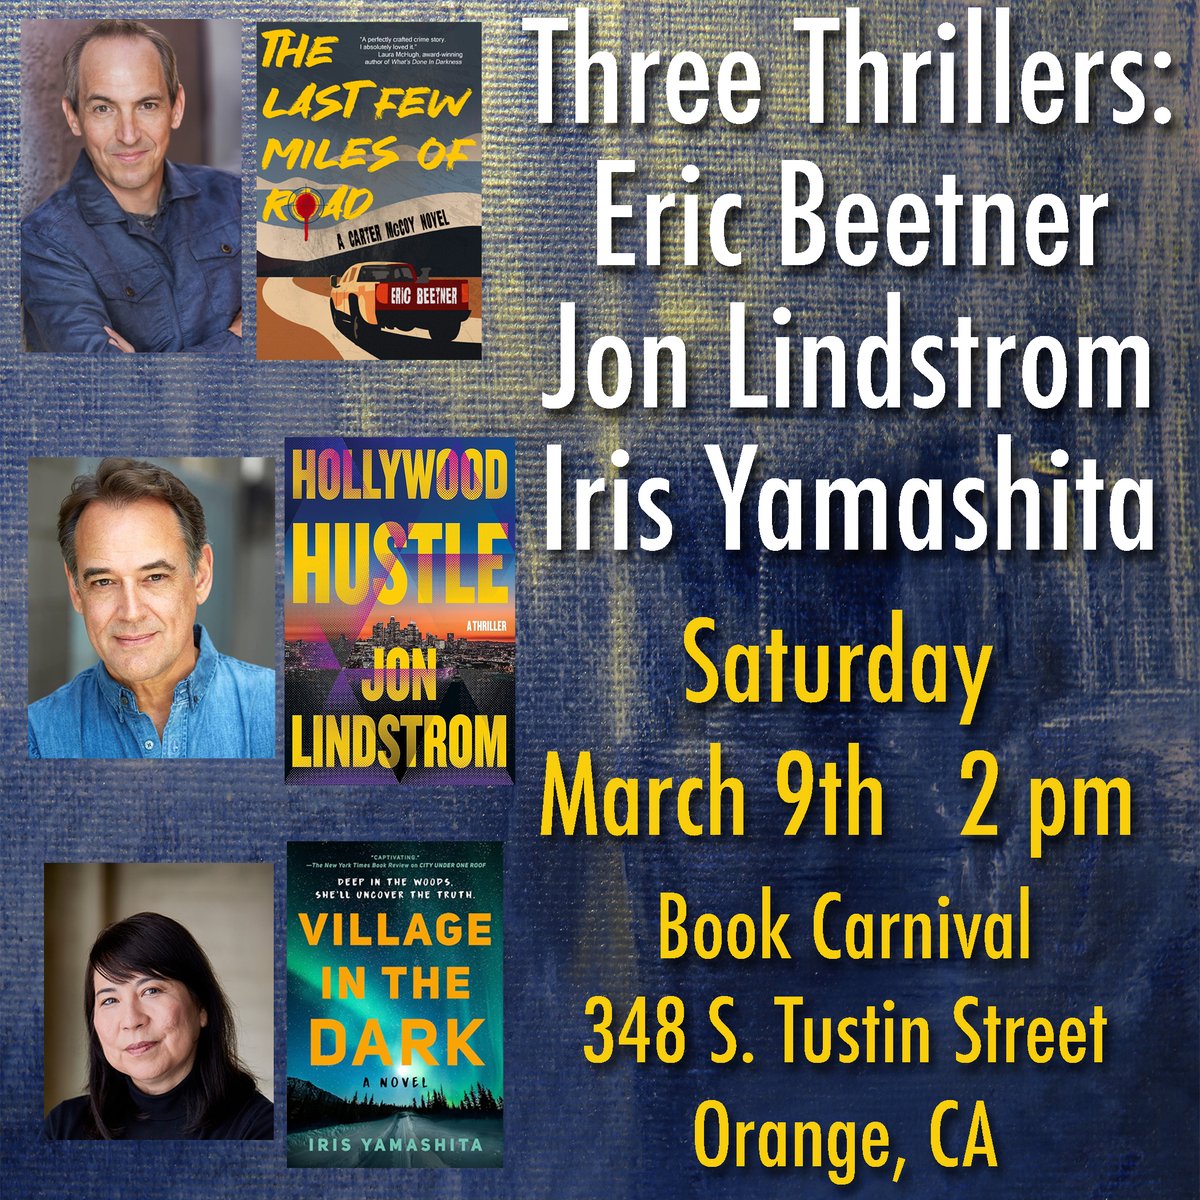 Now that the first event is done for The Last Few Miles Of Road, we move on to the next one- March 9th at Book Carnival in Orange with @thejonlindstrom and @IrisYamashita